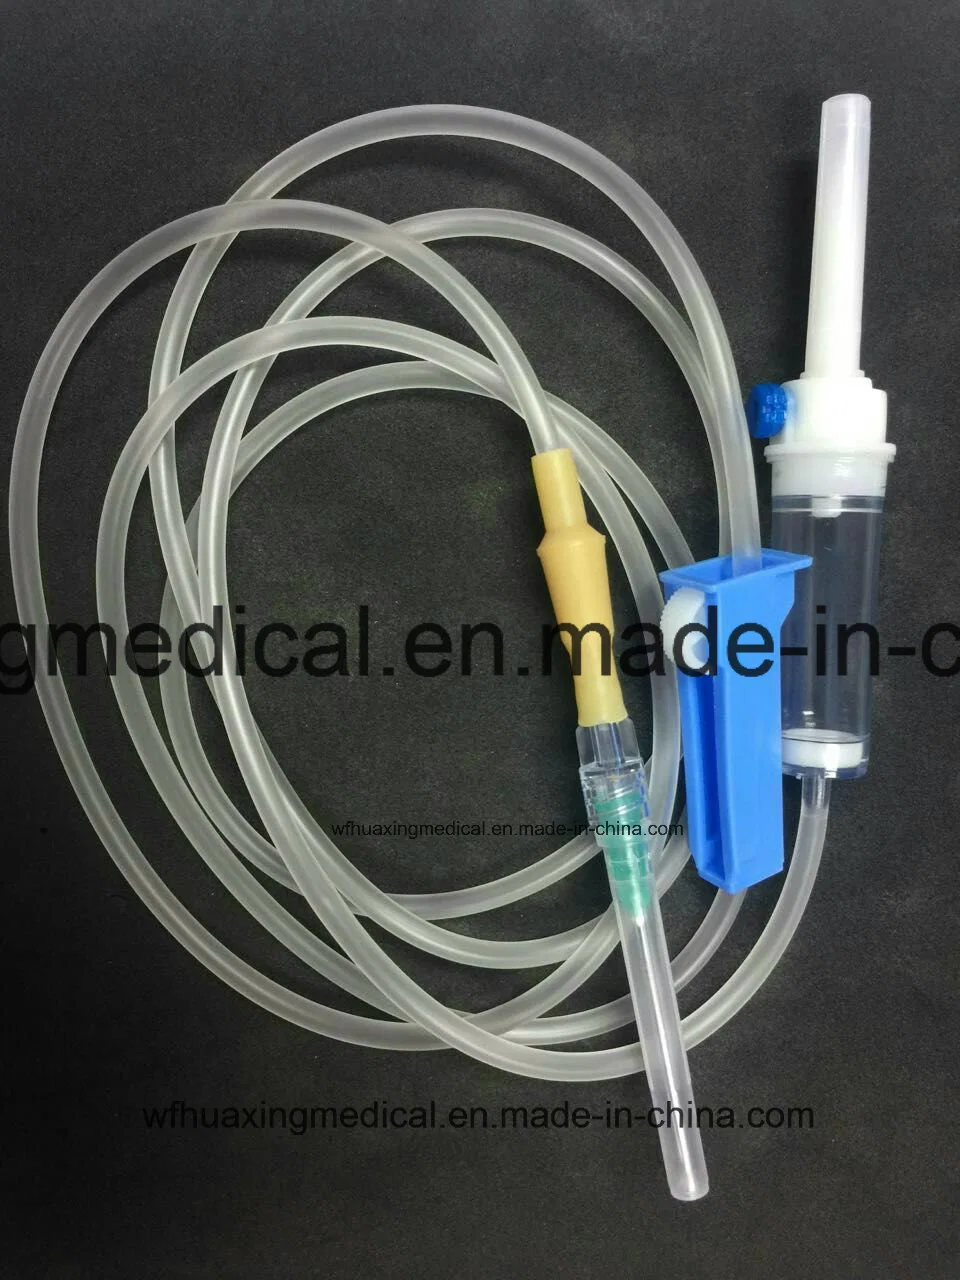 Single-Use Surgical Equipment with Ce, ISO Approved